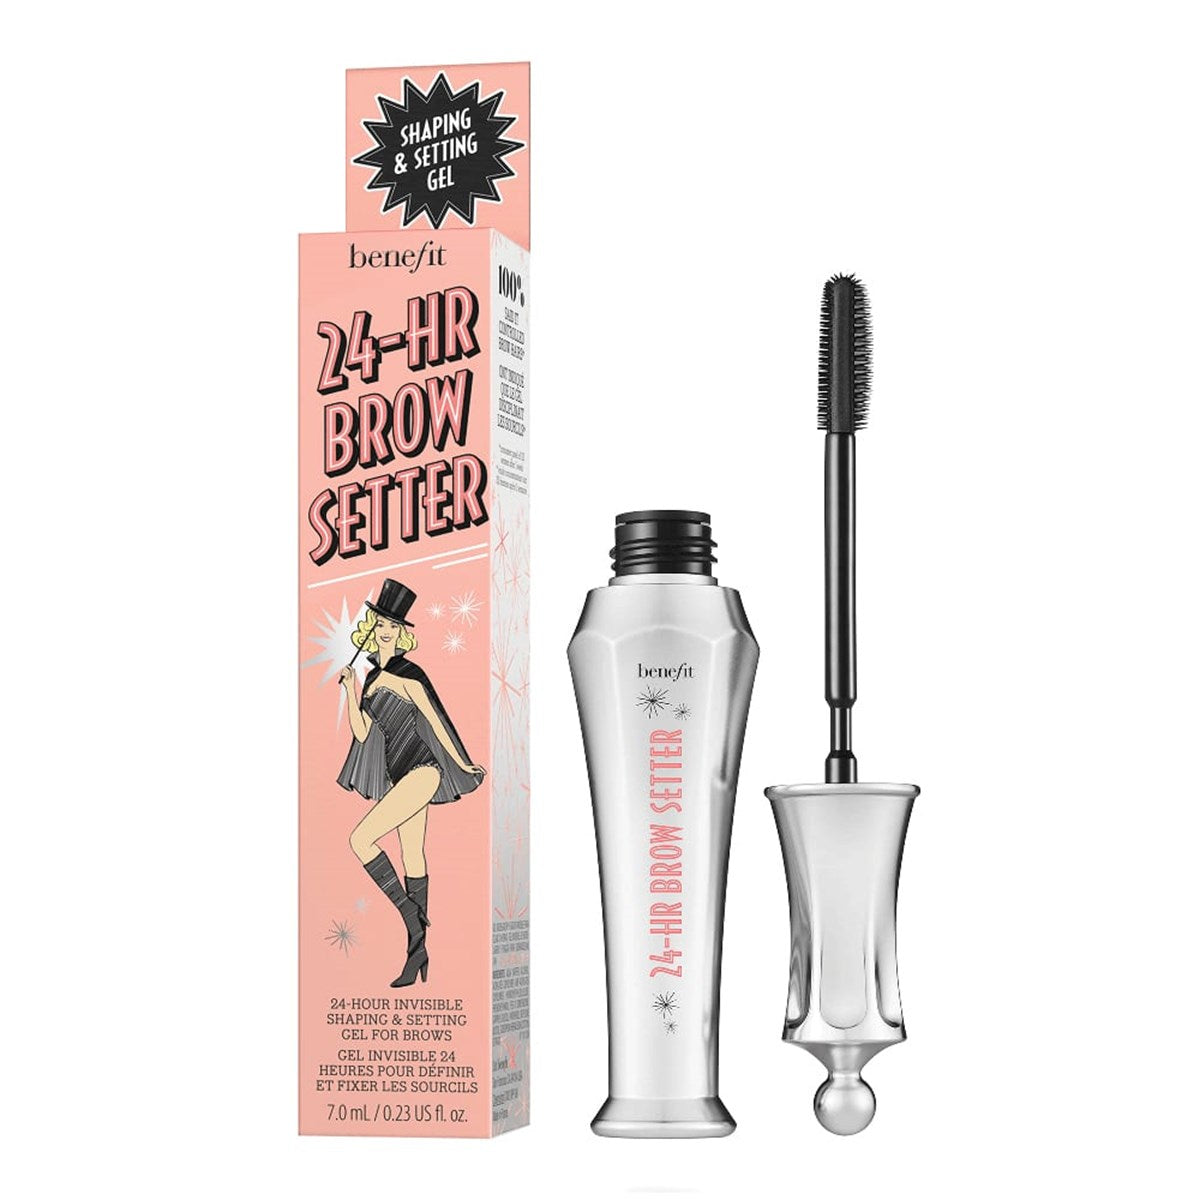 BENEFIT - 24-HR Brow Setter Clear Brow Gel